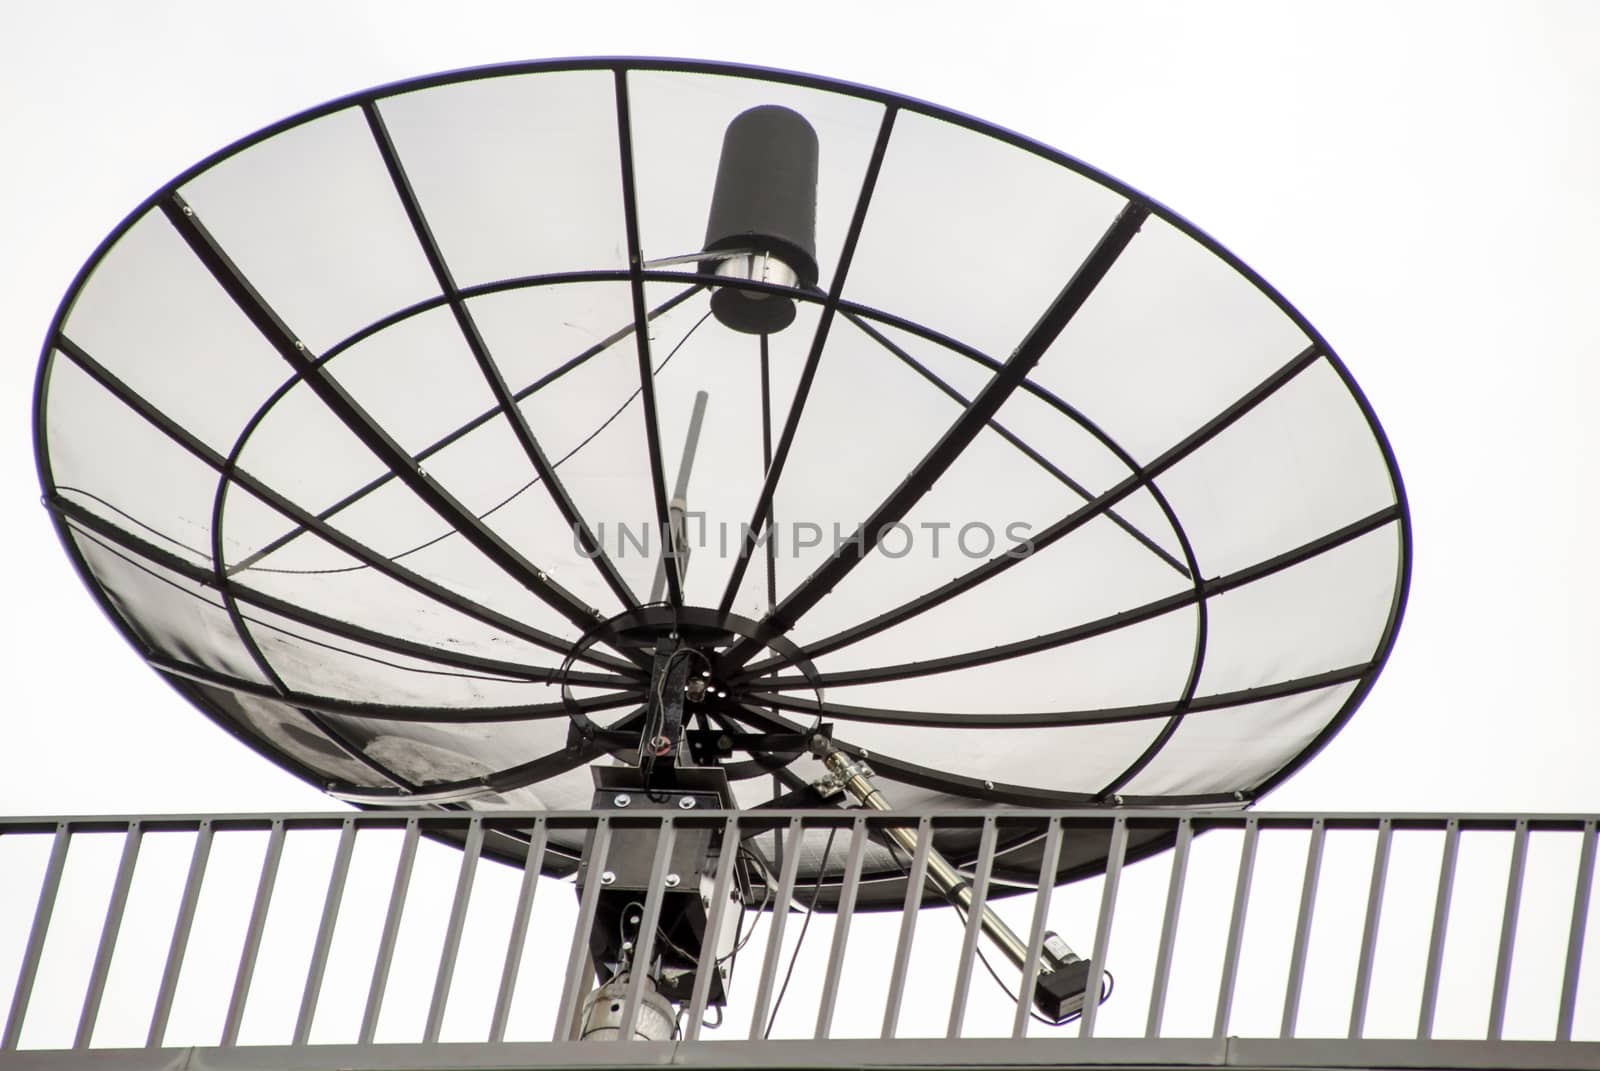 Satellite antenna on the roof of a house